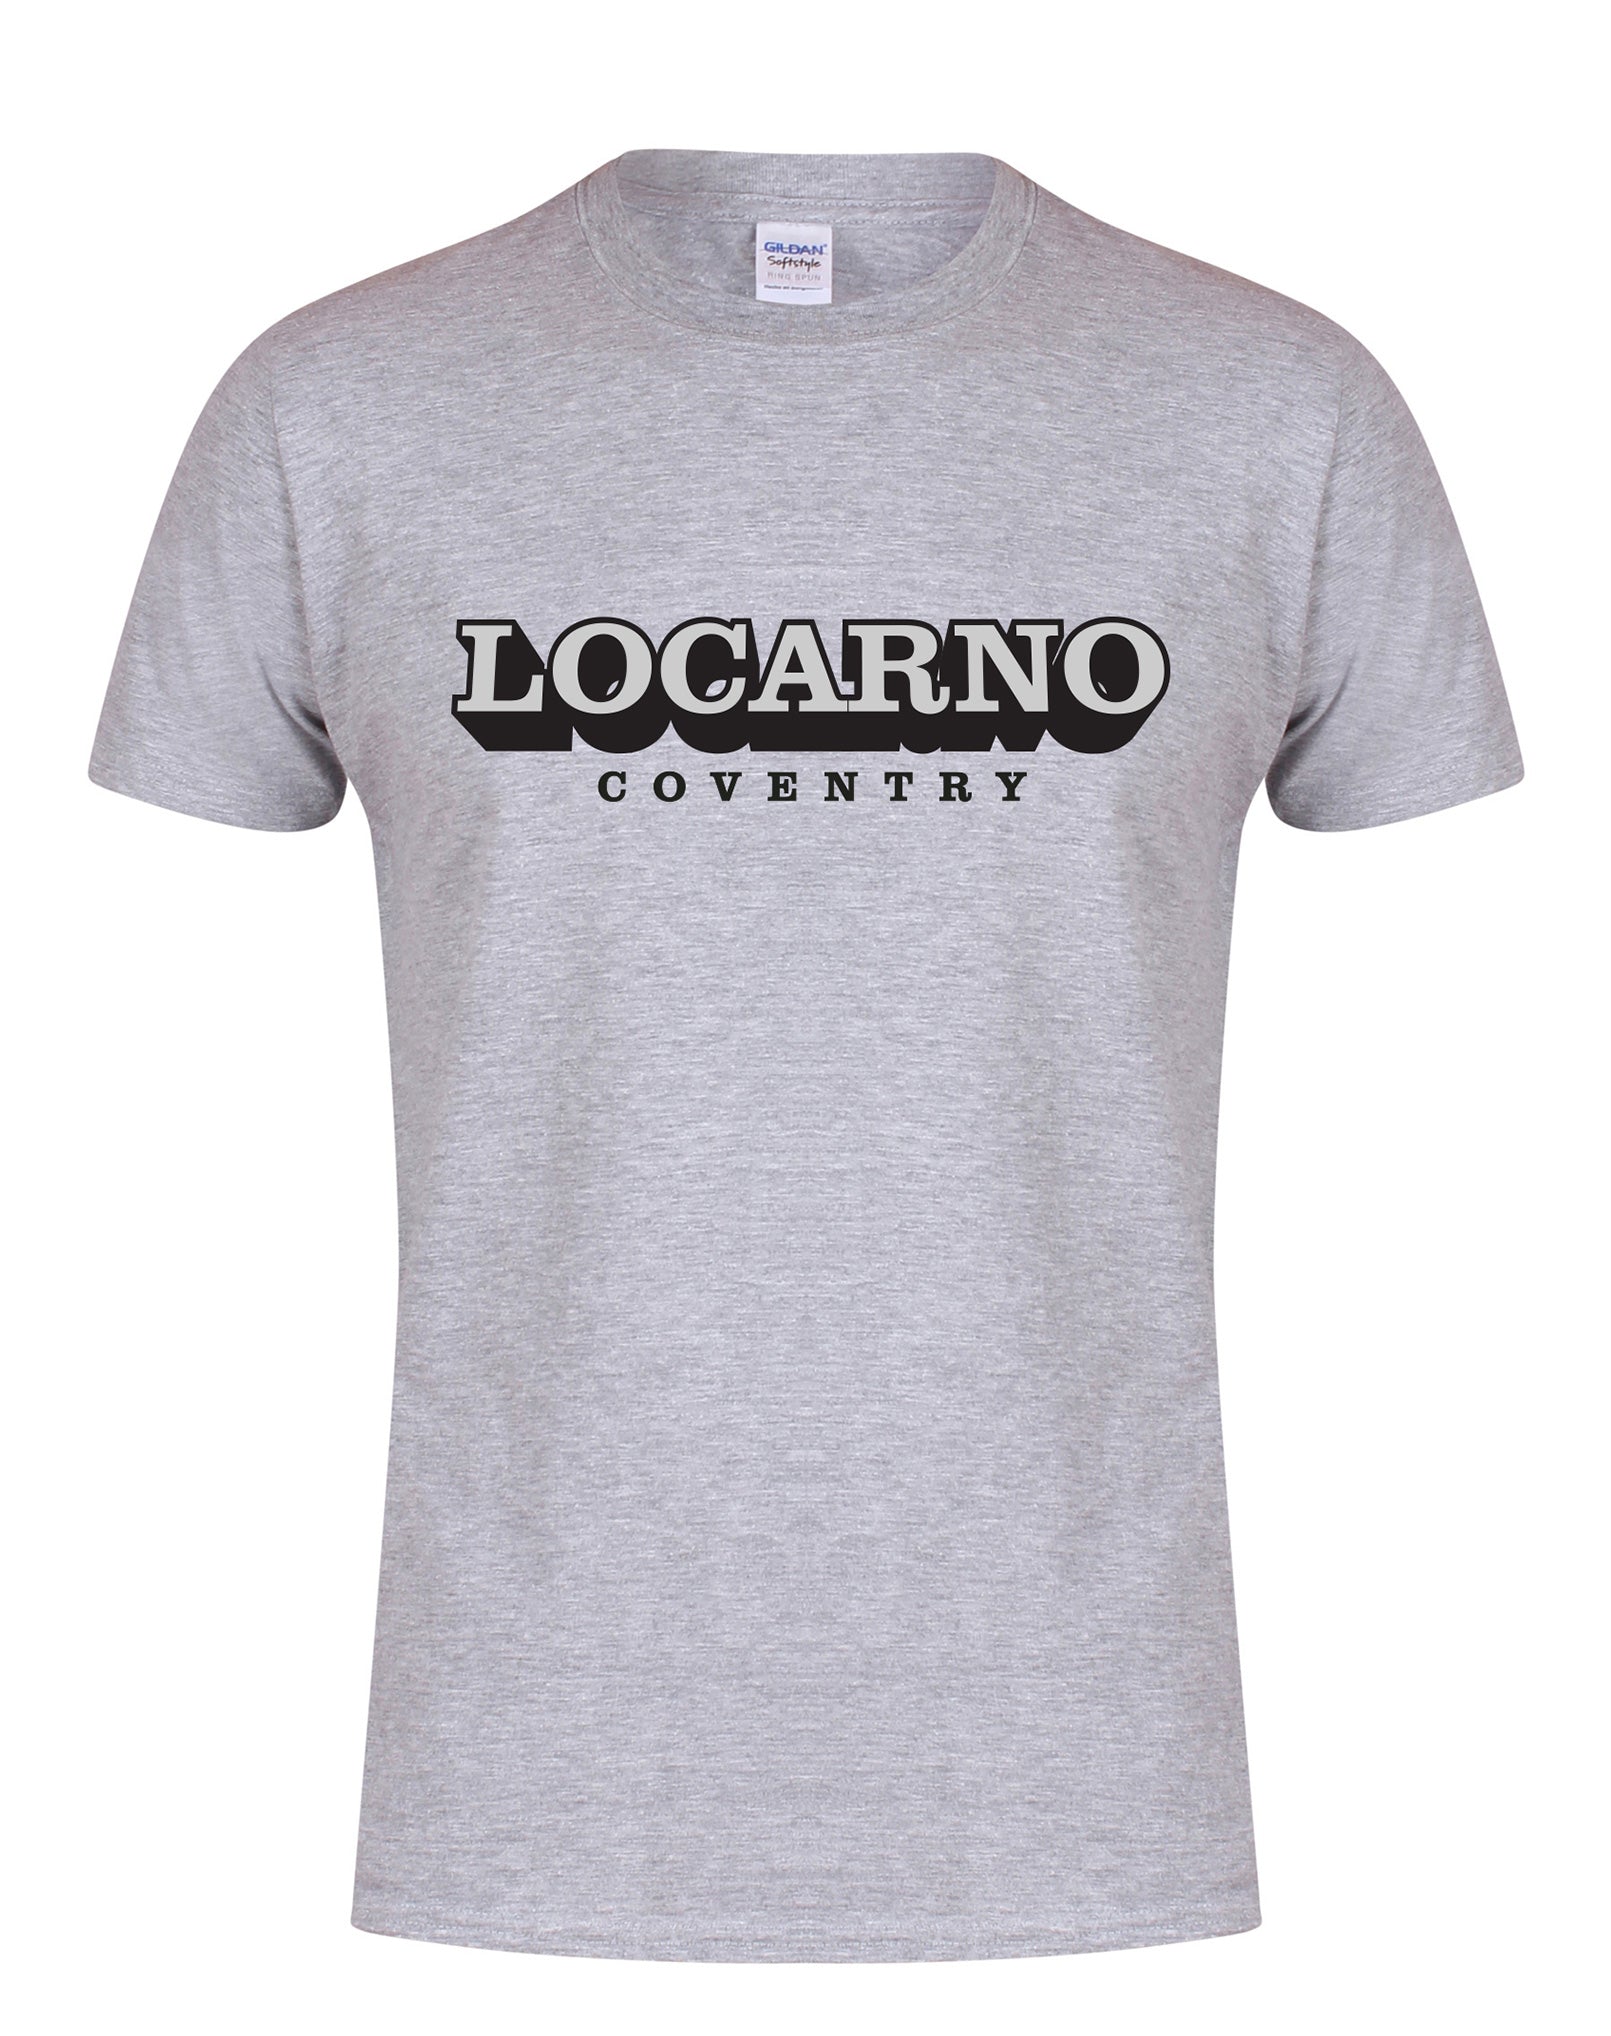 Locarno - Coventry - unisex fit T-shirt - various colours - Dirty Stop Outs